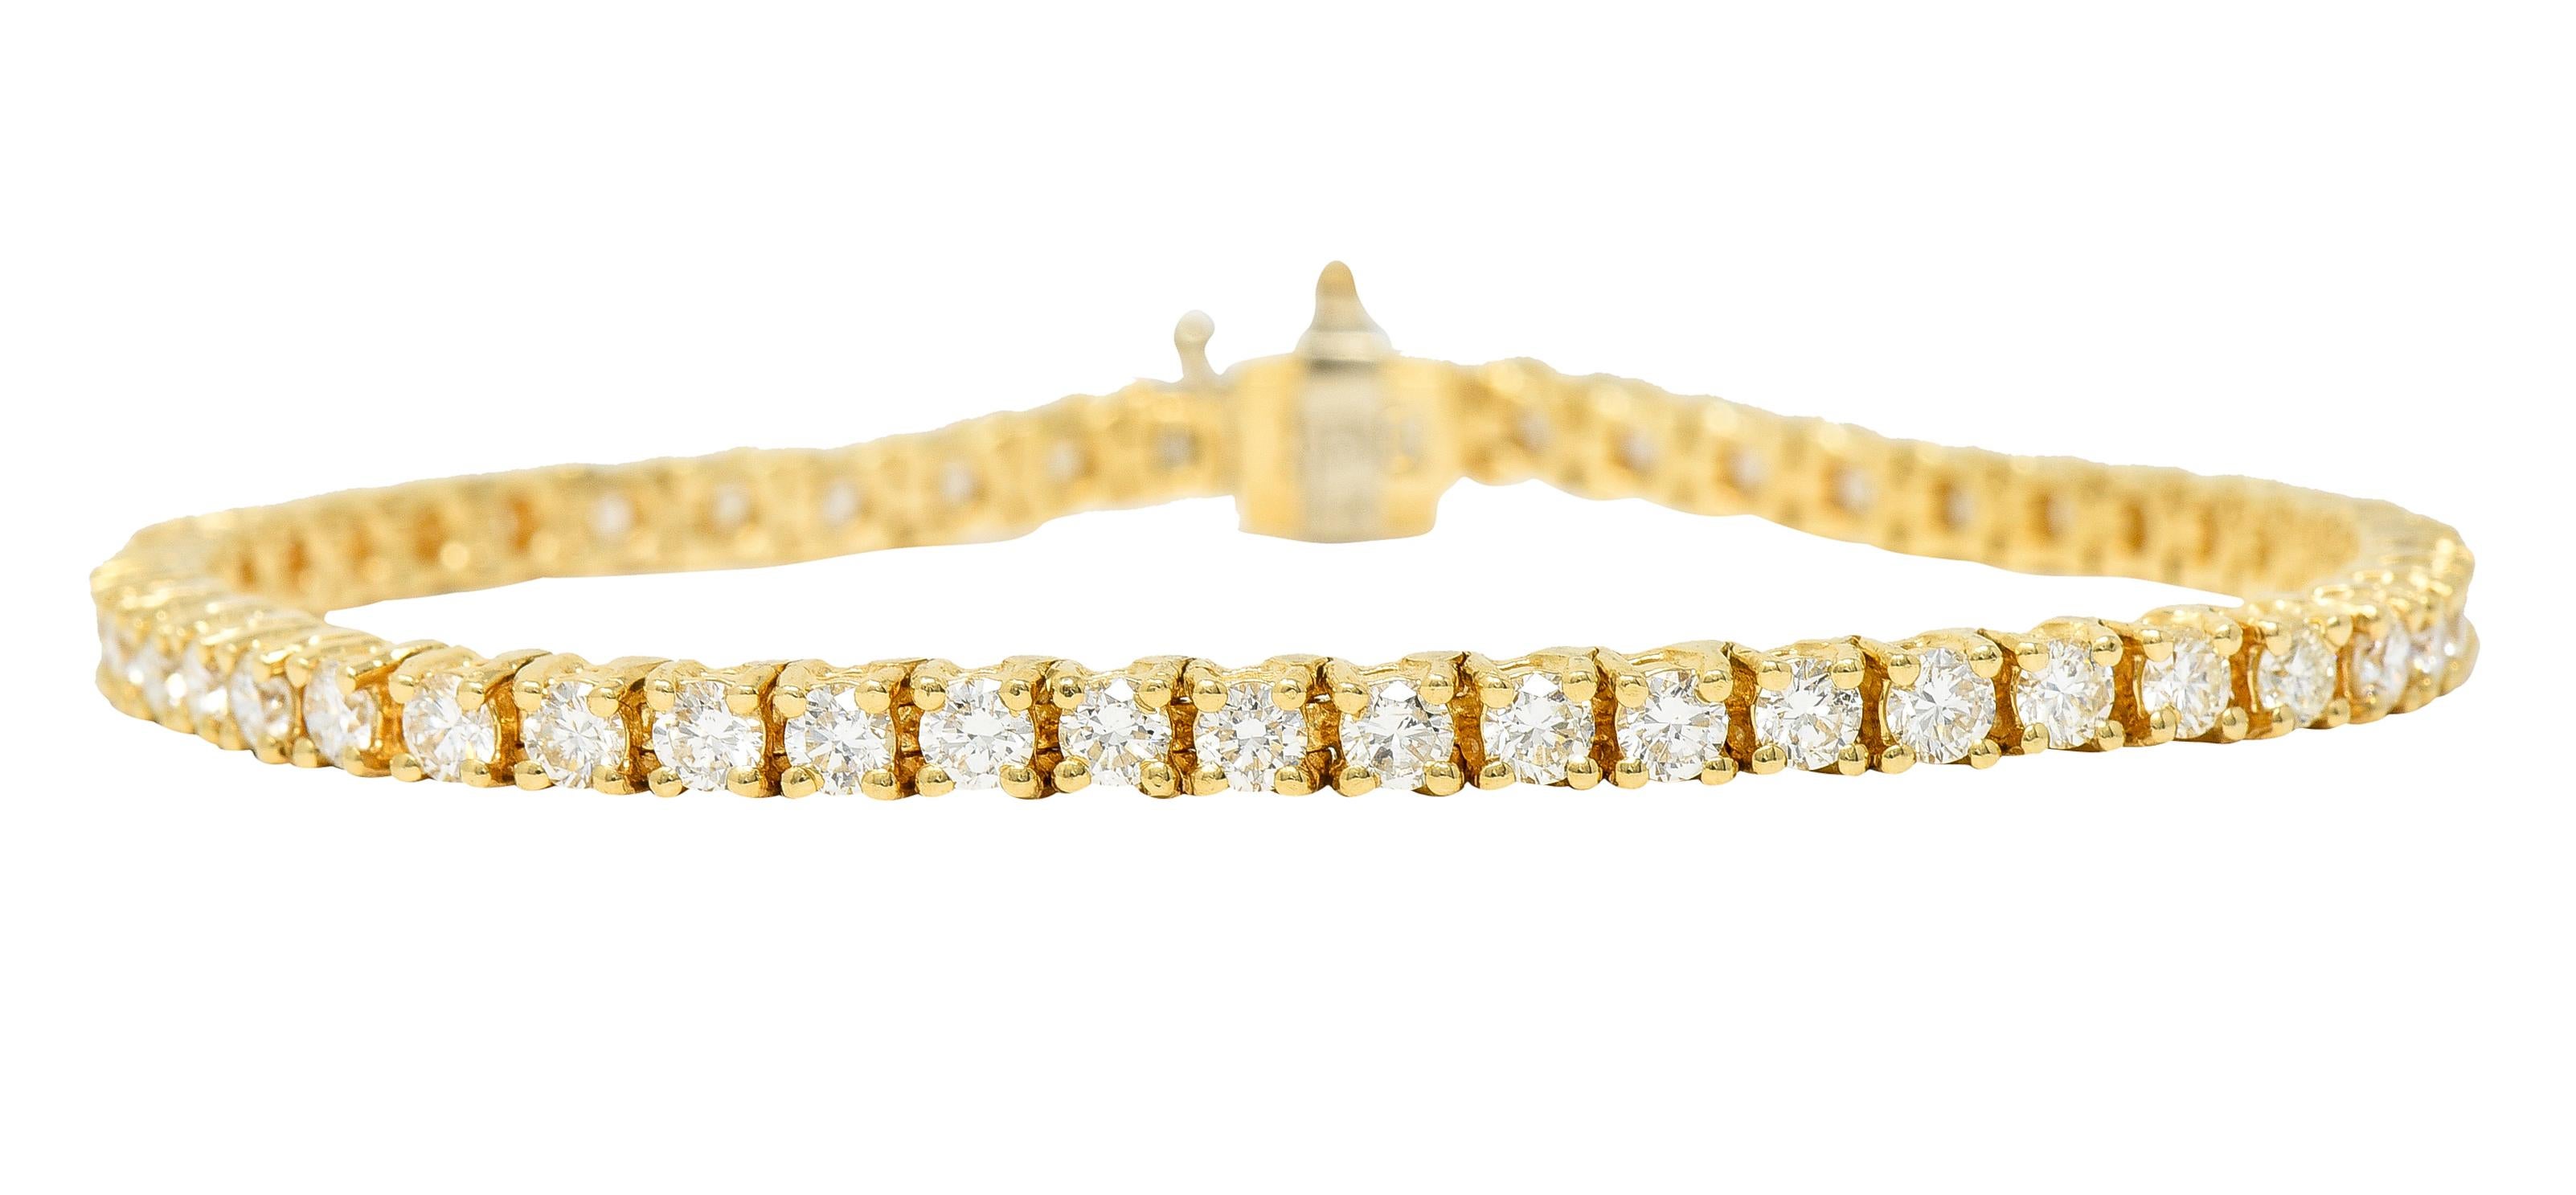 Line bracelet is comprised of articulated square form baskets. Set with round brilliant cut diamonds. Weighing in total approximately 5.00 carat - G/H color with VS to SI clarity. Completed by a concealed clasp with fold-over safety. With maker's